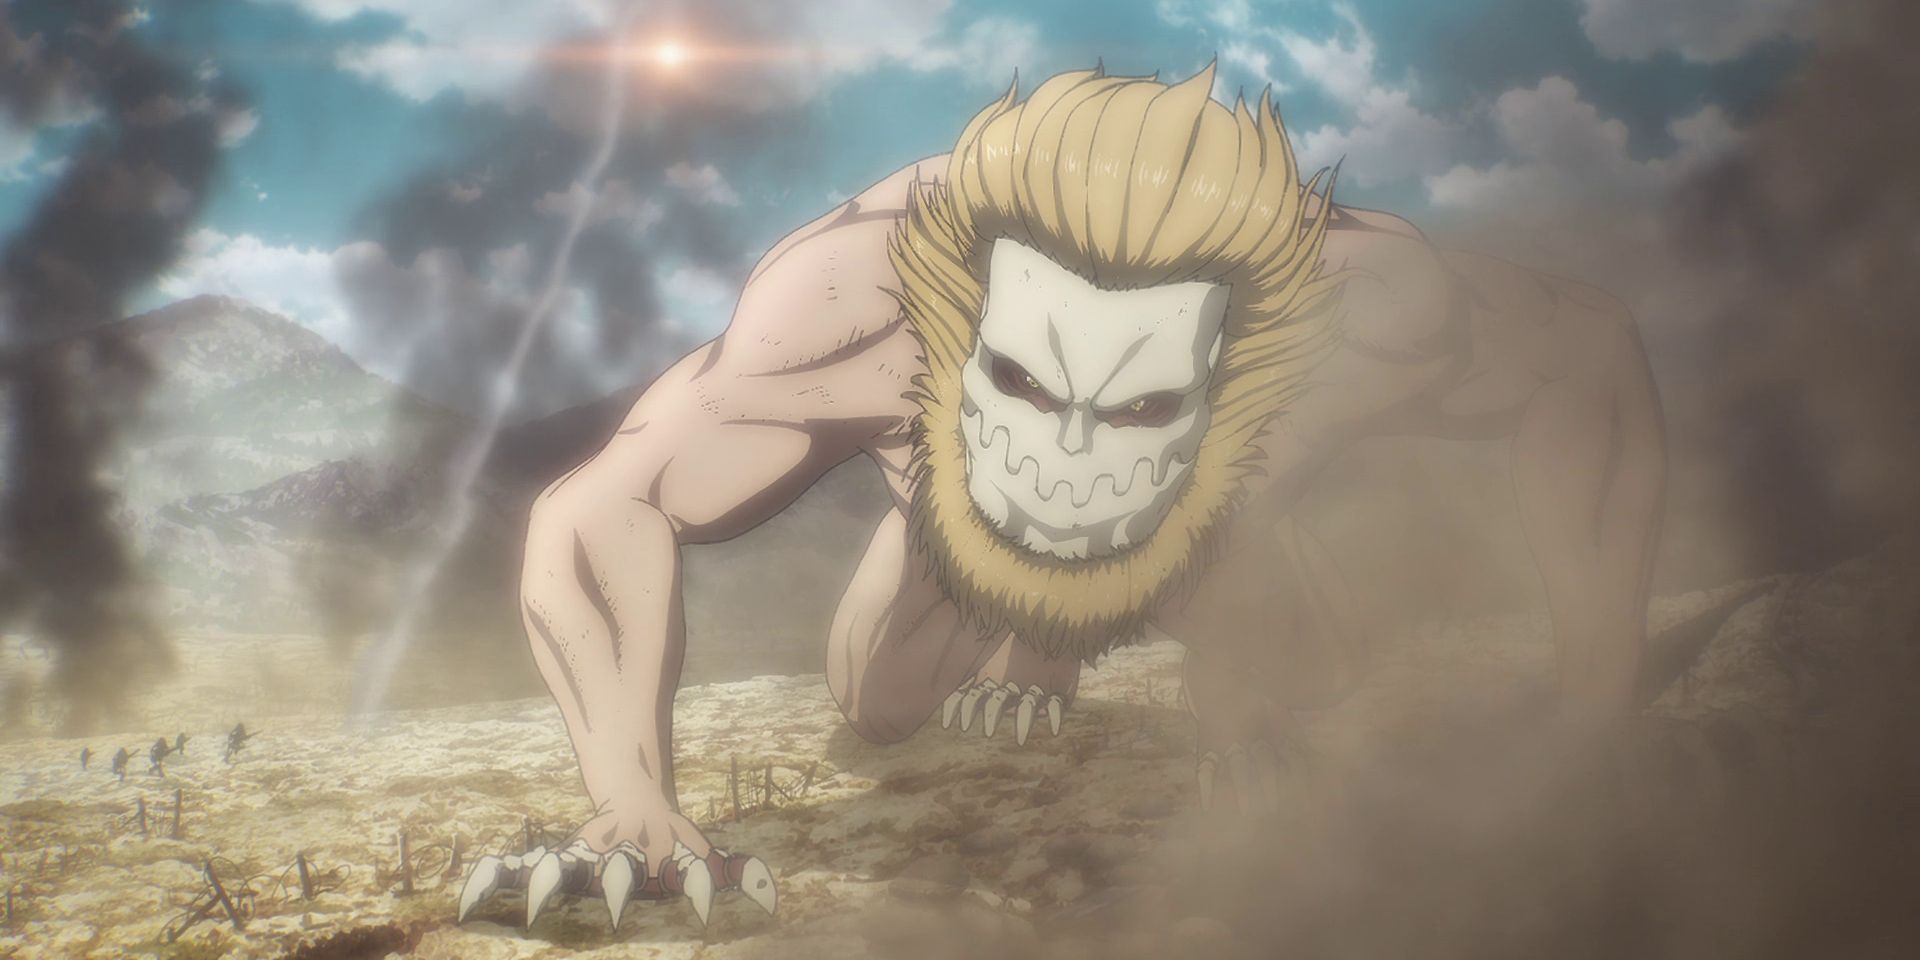 Attack on Titan Season 4 Showcases the Differences Between Wit & MAPPA